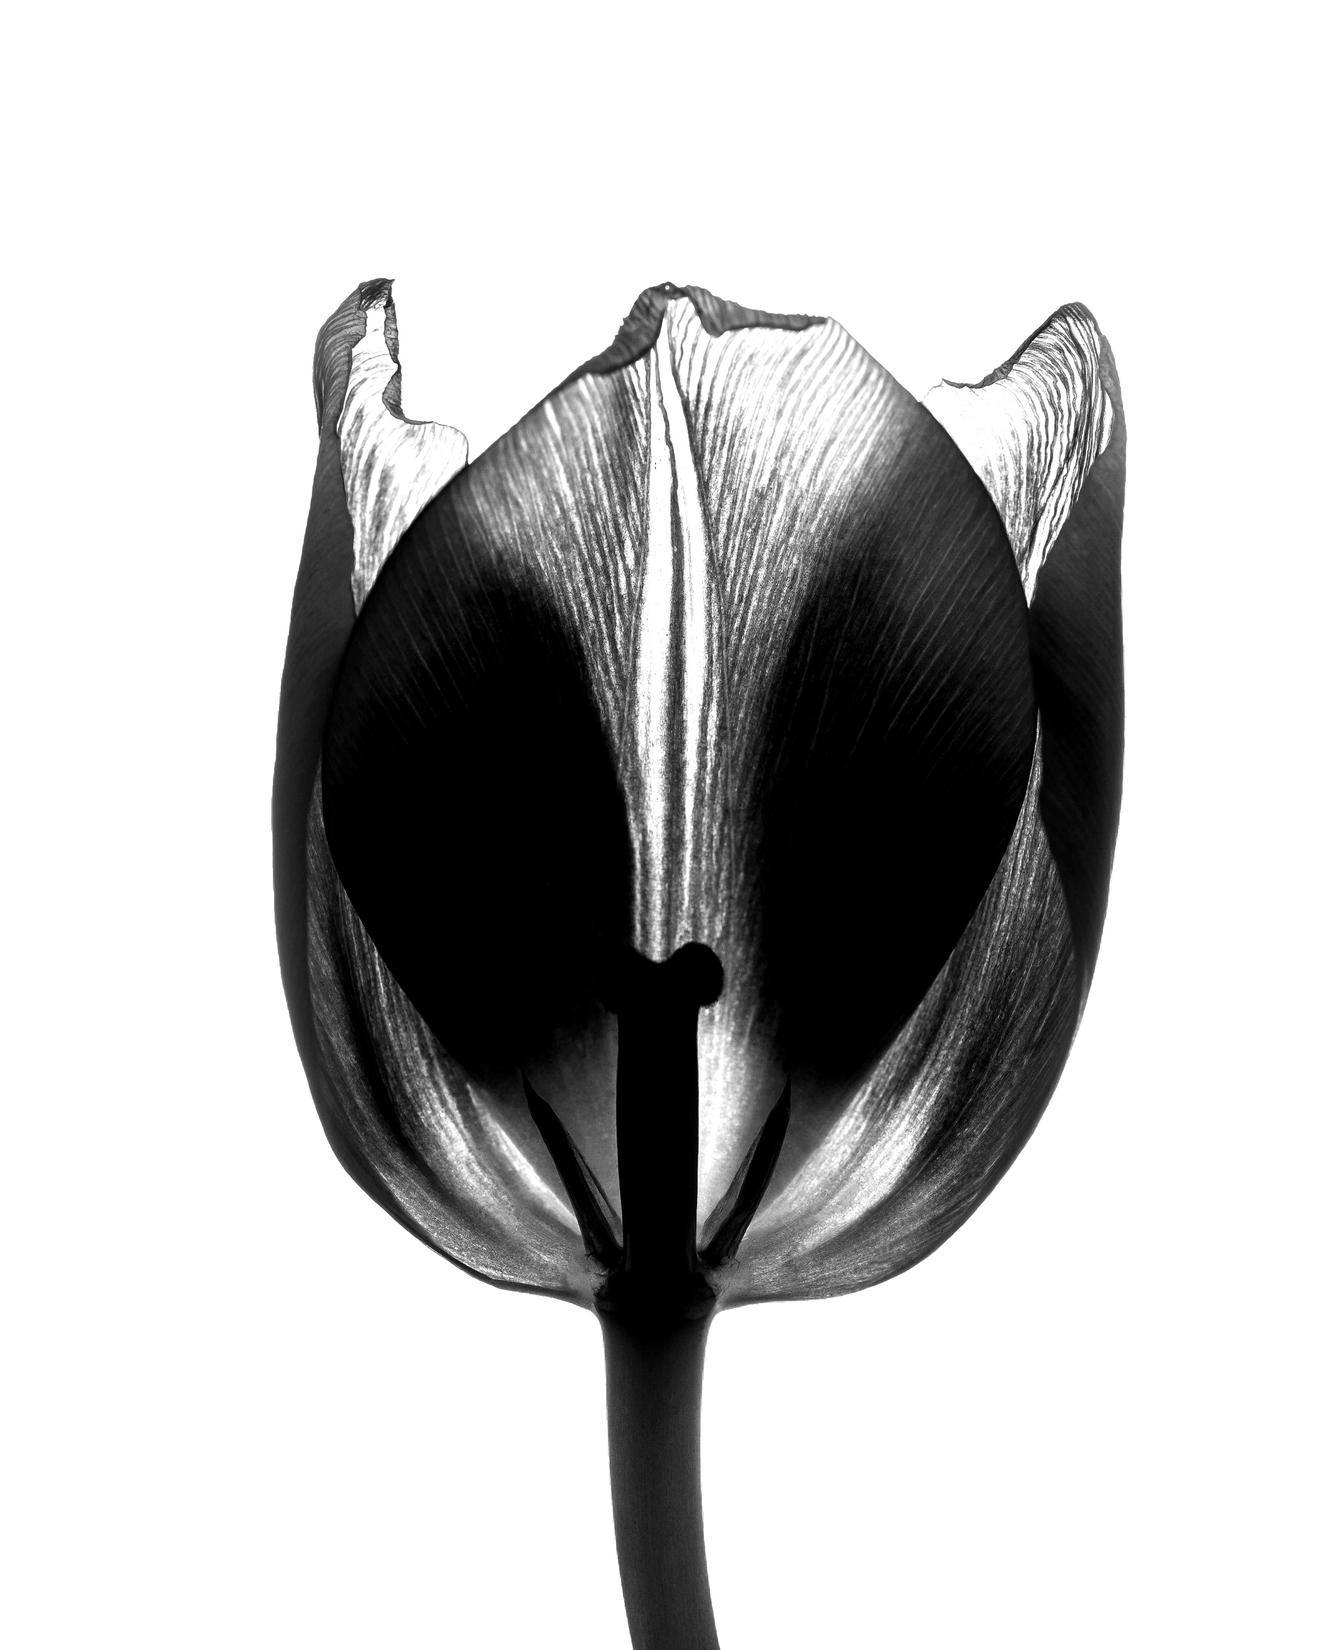 Silhouette of a single tulip against a white backdrop in Netherlands